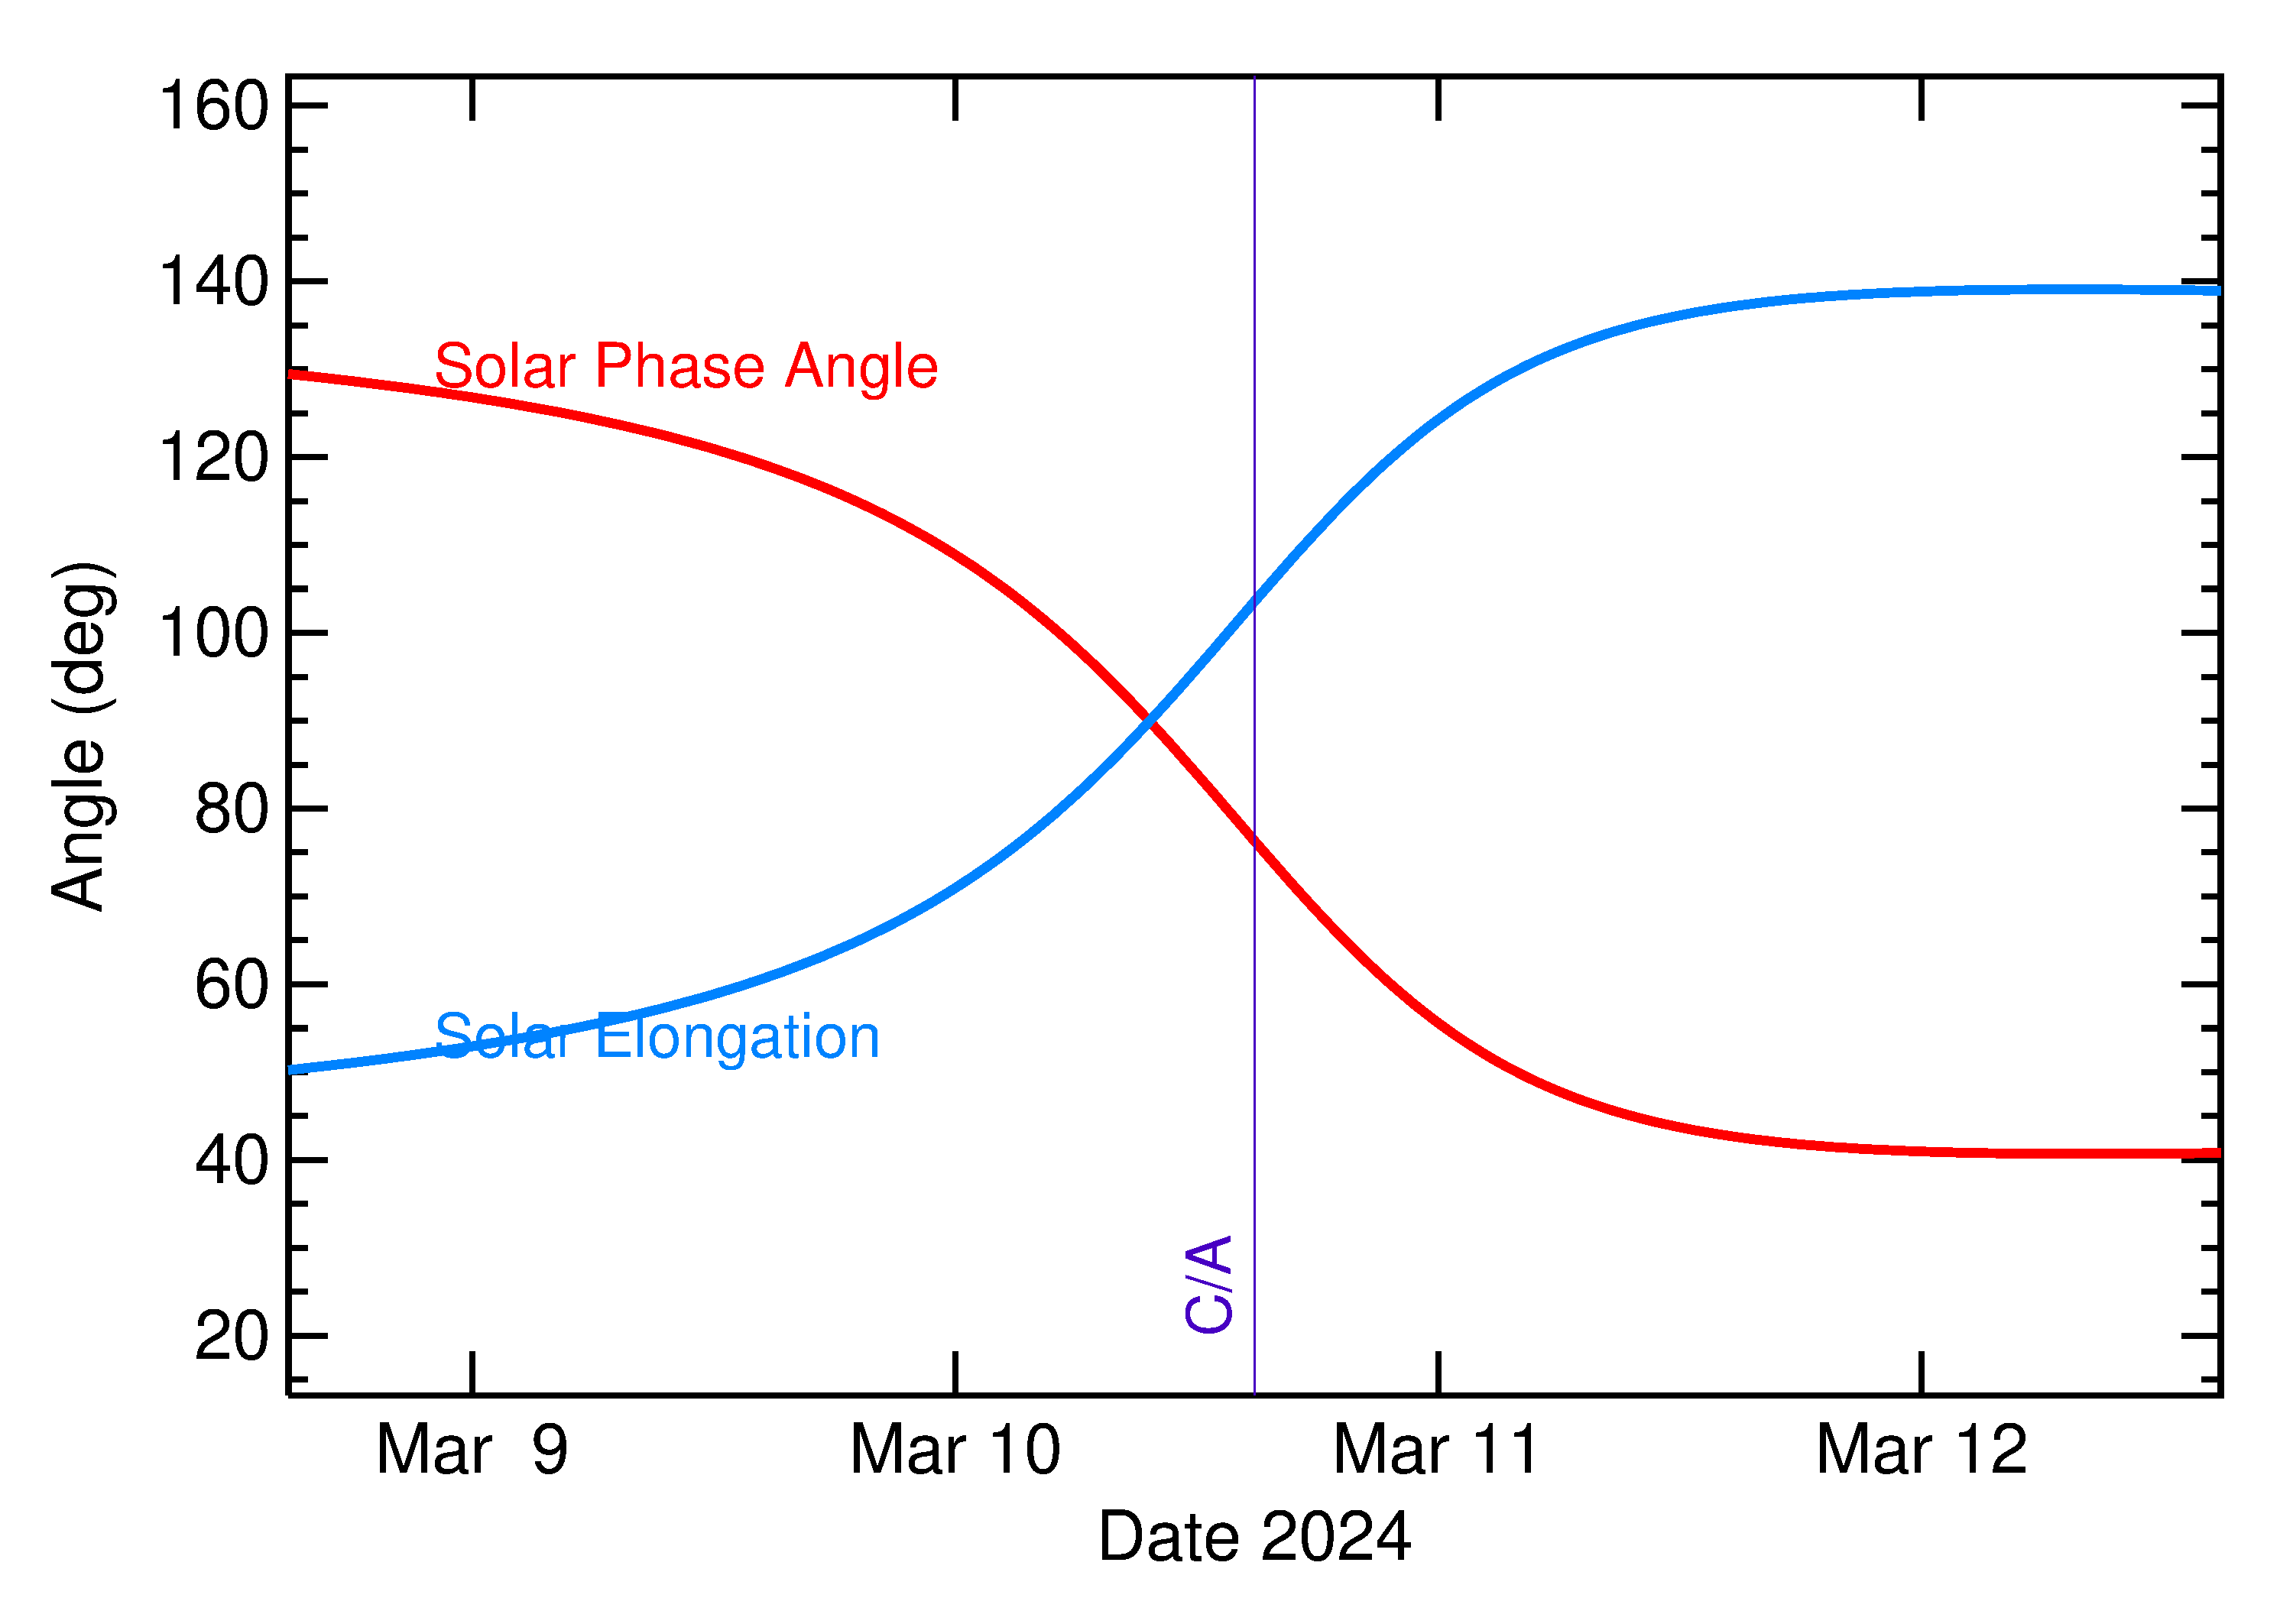 Solar Elongation and Solar Phase Angle of 2024 FC1 in the days around closest approach